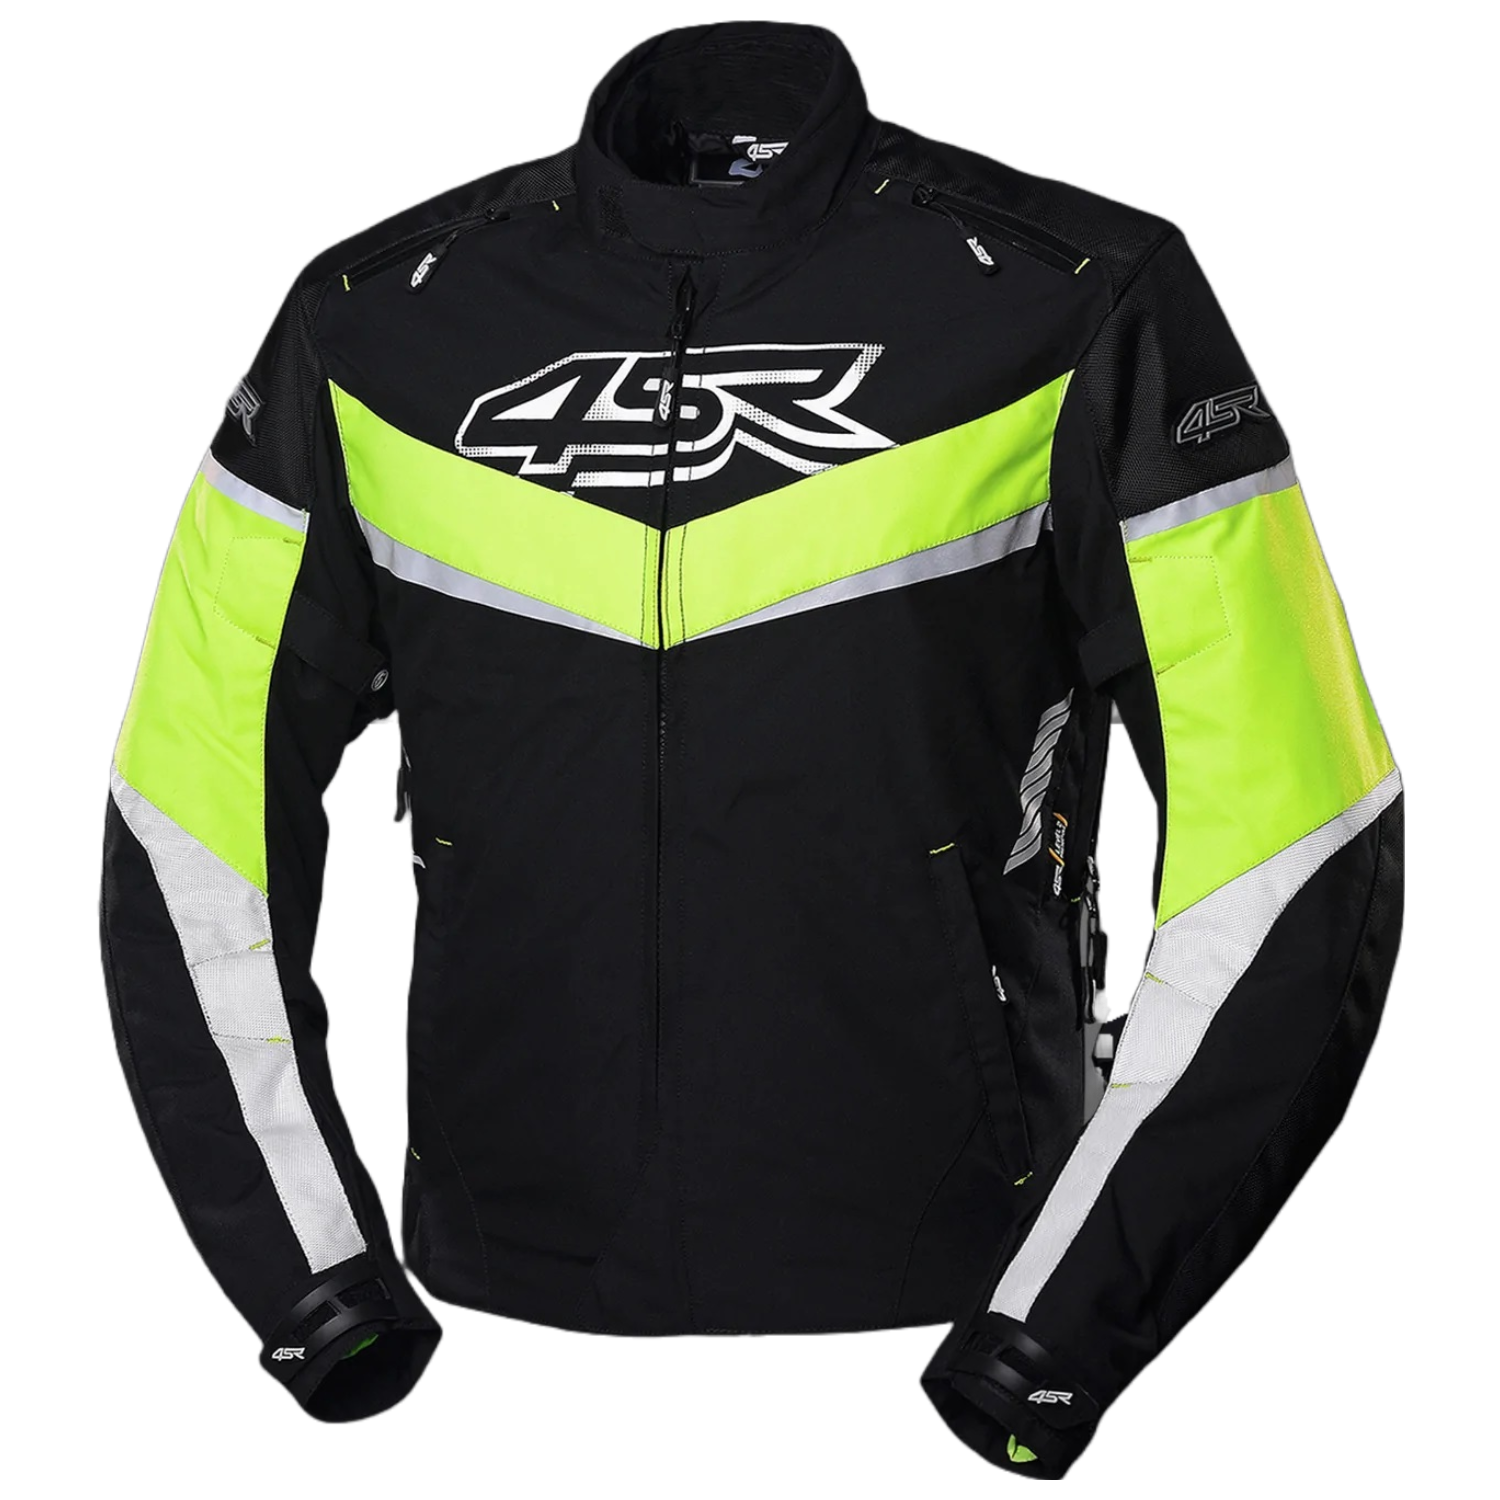 Lime Yellow Leather Jacket, Rider Racing Jackets, Leather Jacket Racing, Unisex Leather Jacket